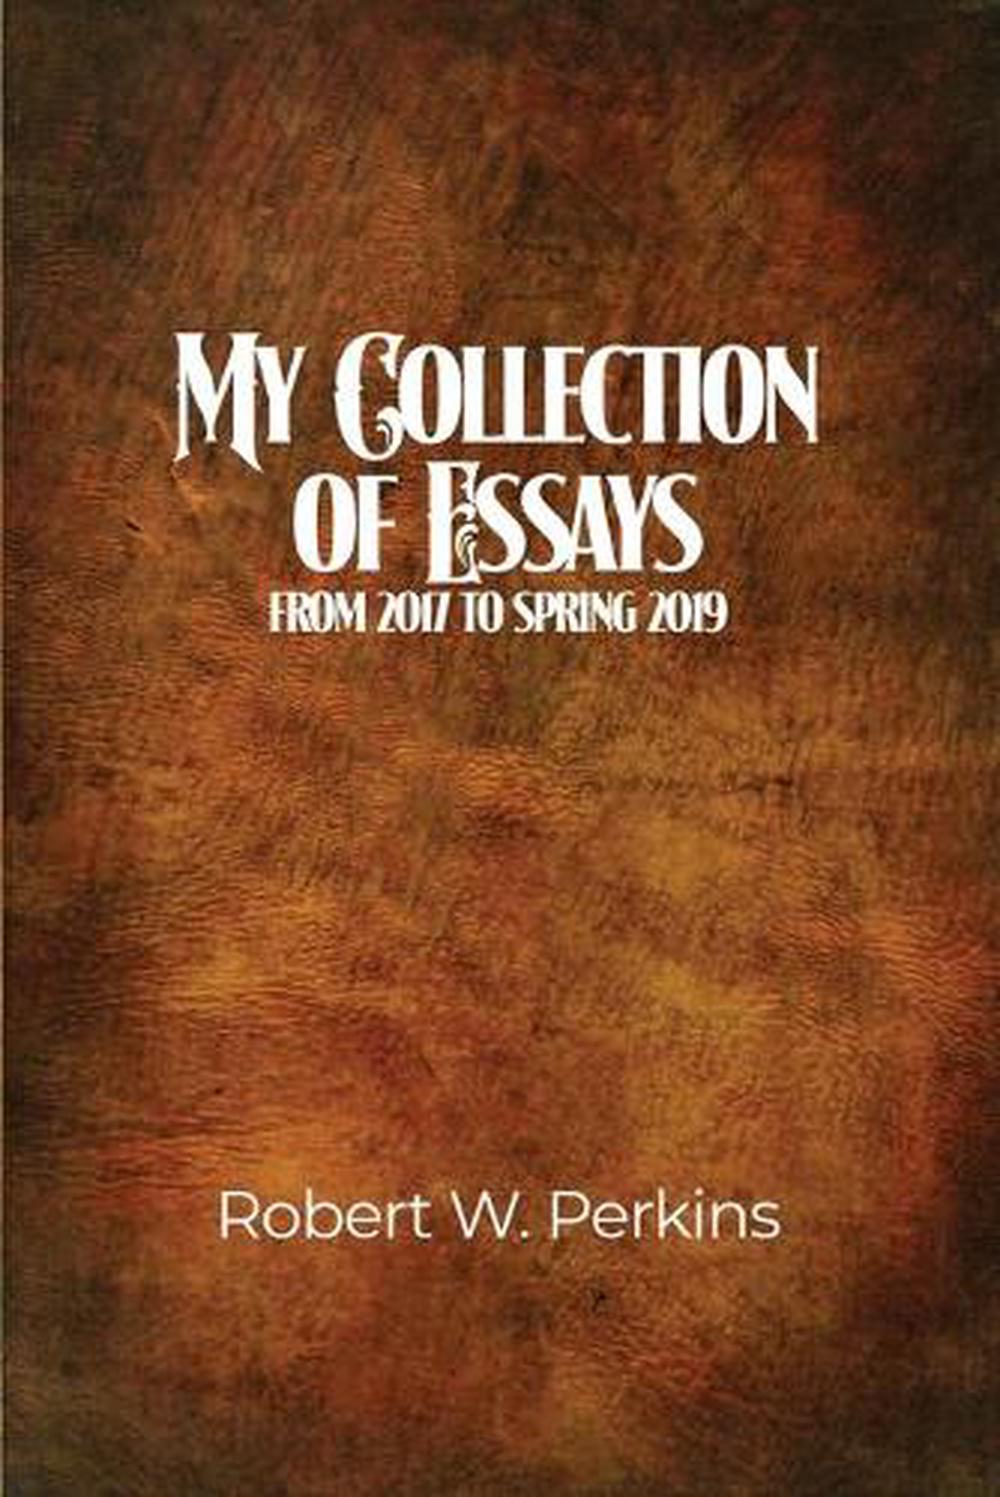 book that is a collection of essays